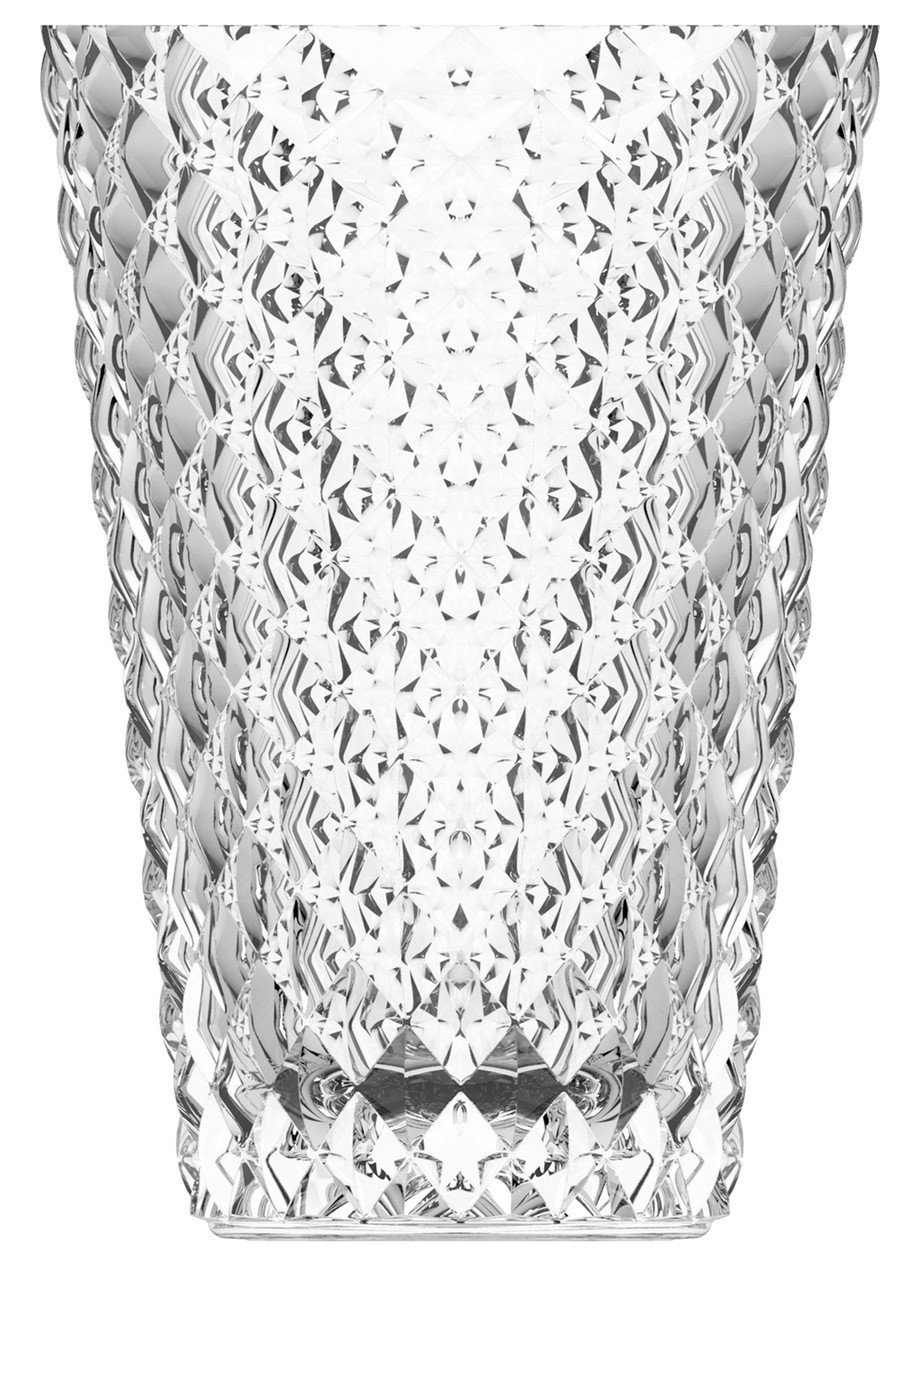 11 Lovable Marquis by Waterford Sheridan Flared 11 Crystal Vase 2024 free download marquis by waterford sheridan flared 11 crystal vase of cristal darques paris mythe vase 27cm gift boxed myer online throughout 546311710 zm 1